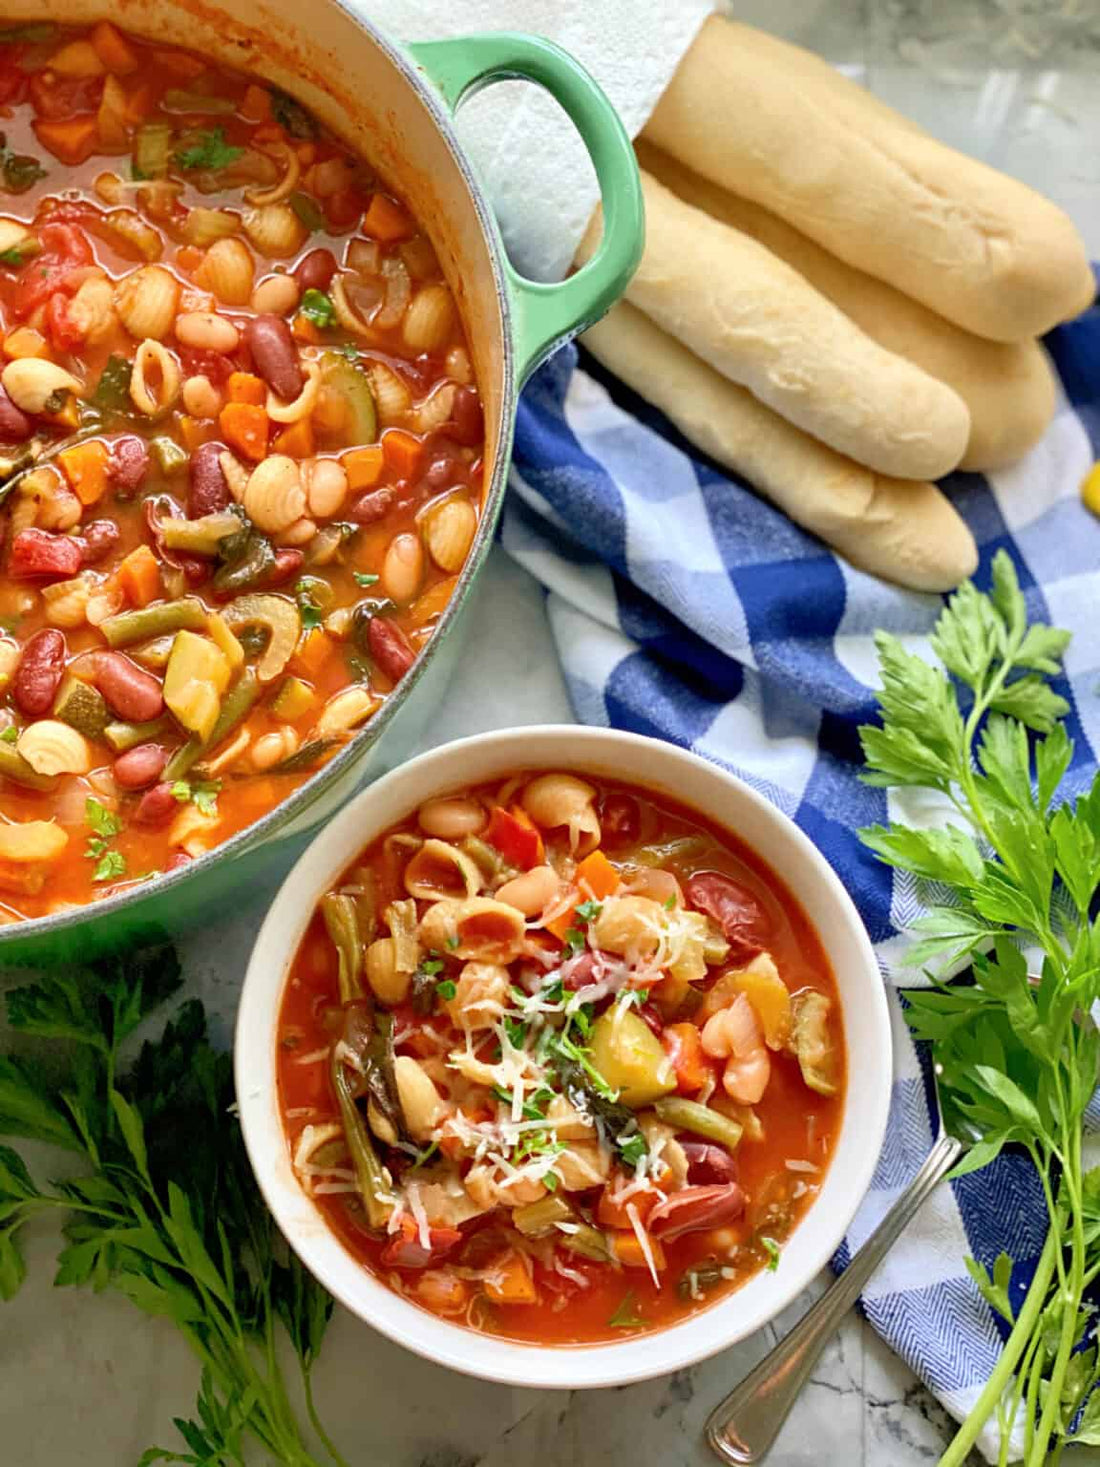 How to make Minestrone